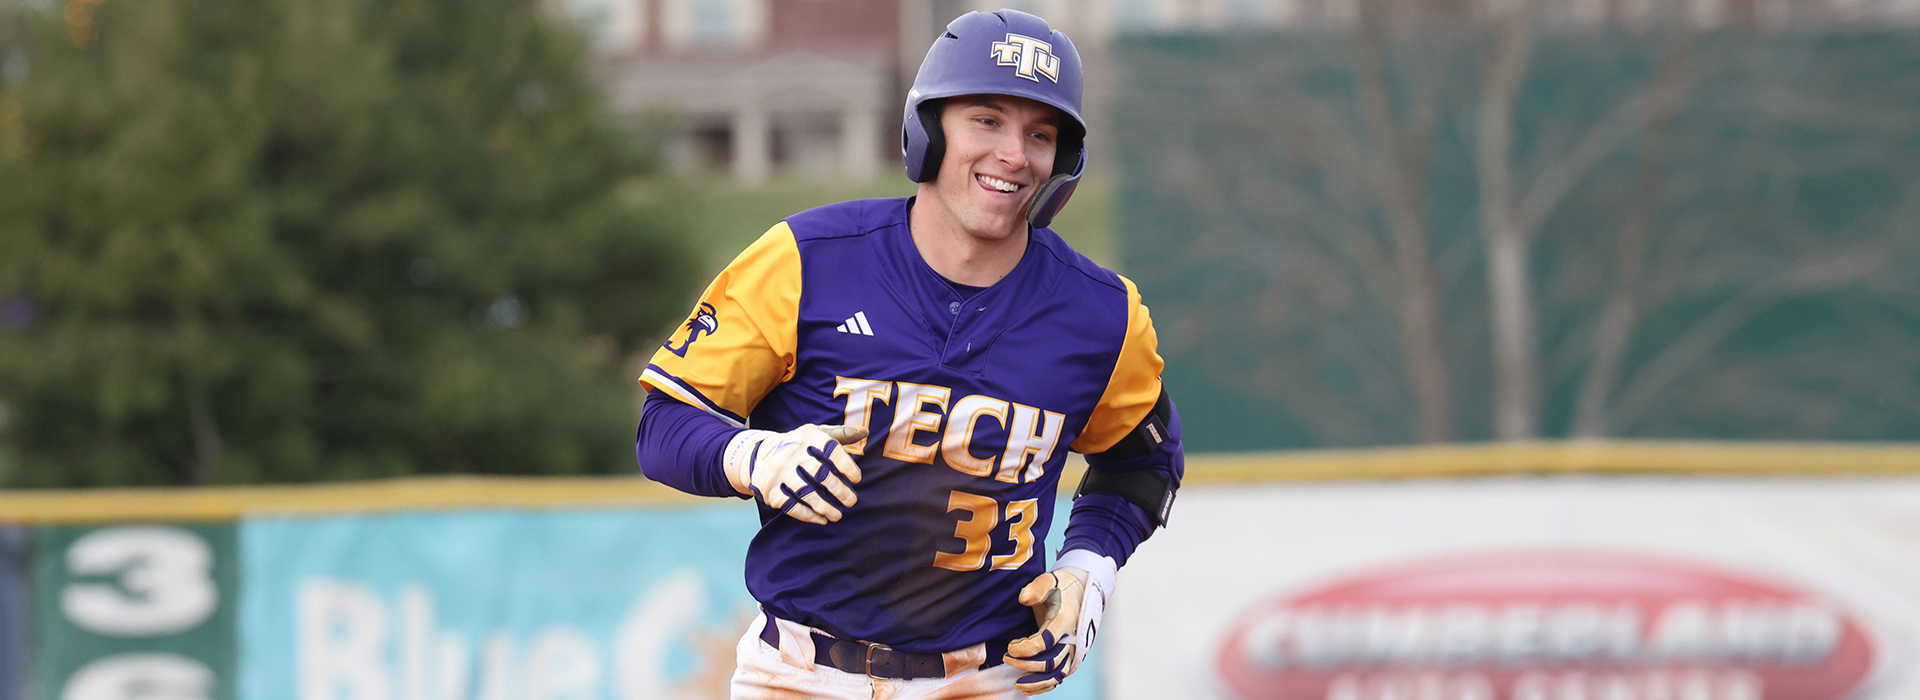 Game one walk-off, big fifth inning in game two lift Tech to doubleheader sweep of Lions